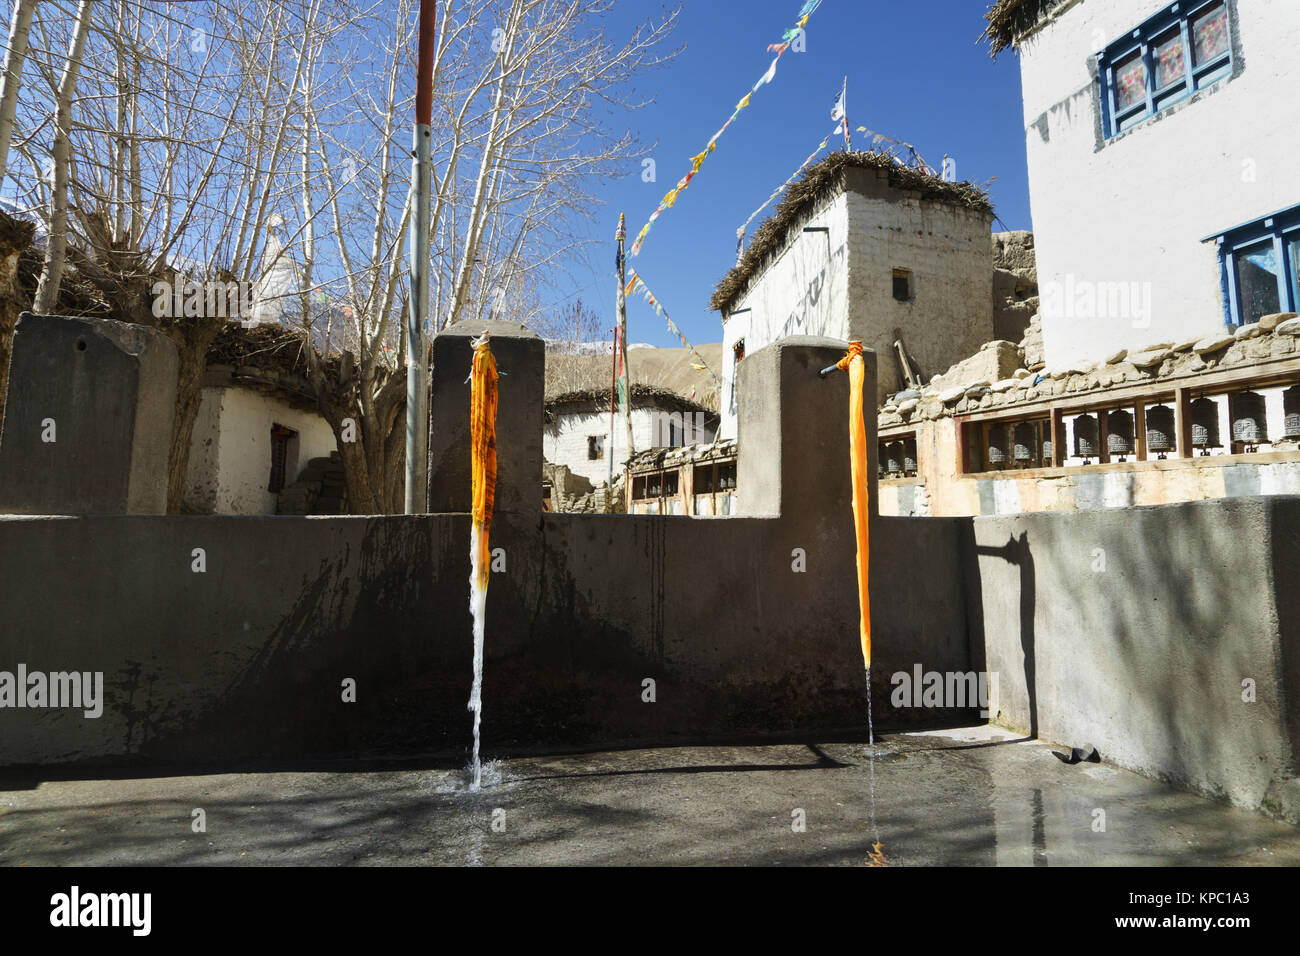 Public water supply adjacent to a Mani wall in the Tibetan village of Ghemi, Upper Mustang region, Nepal. Stock Photo